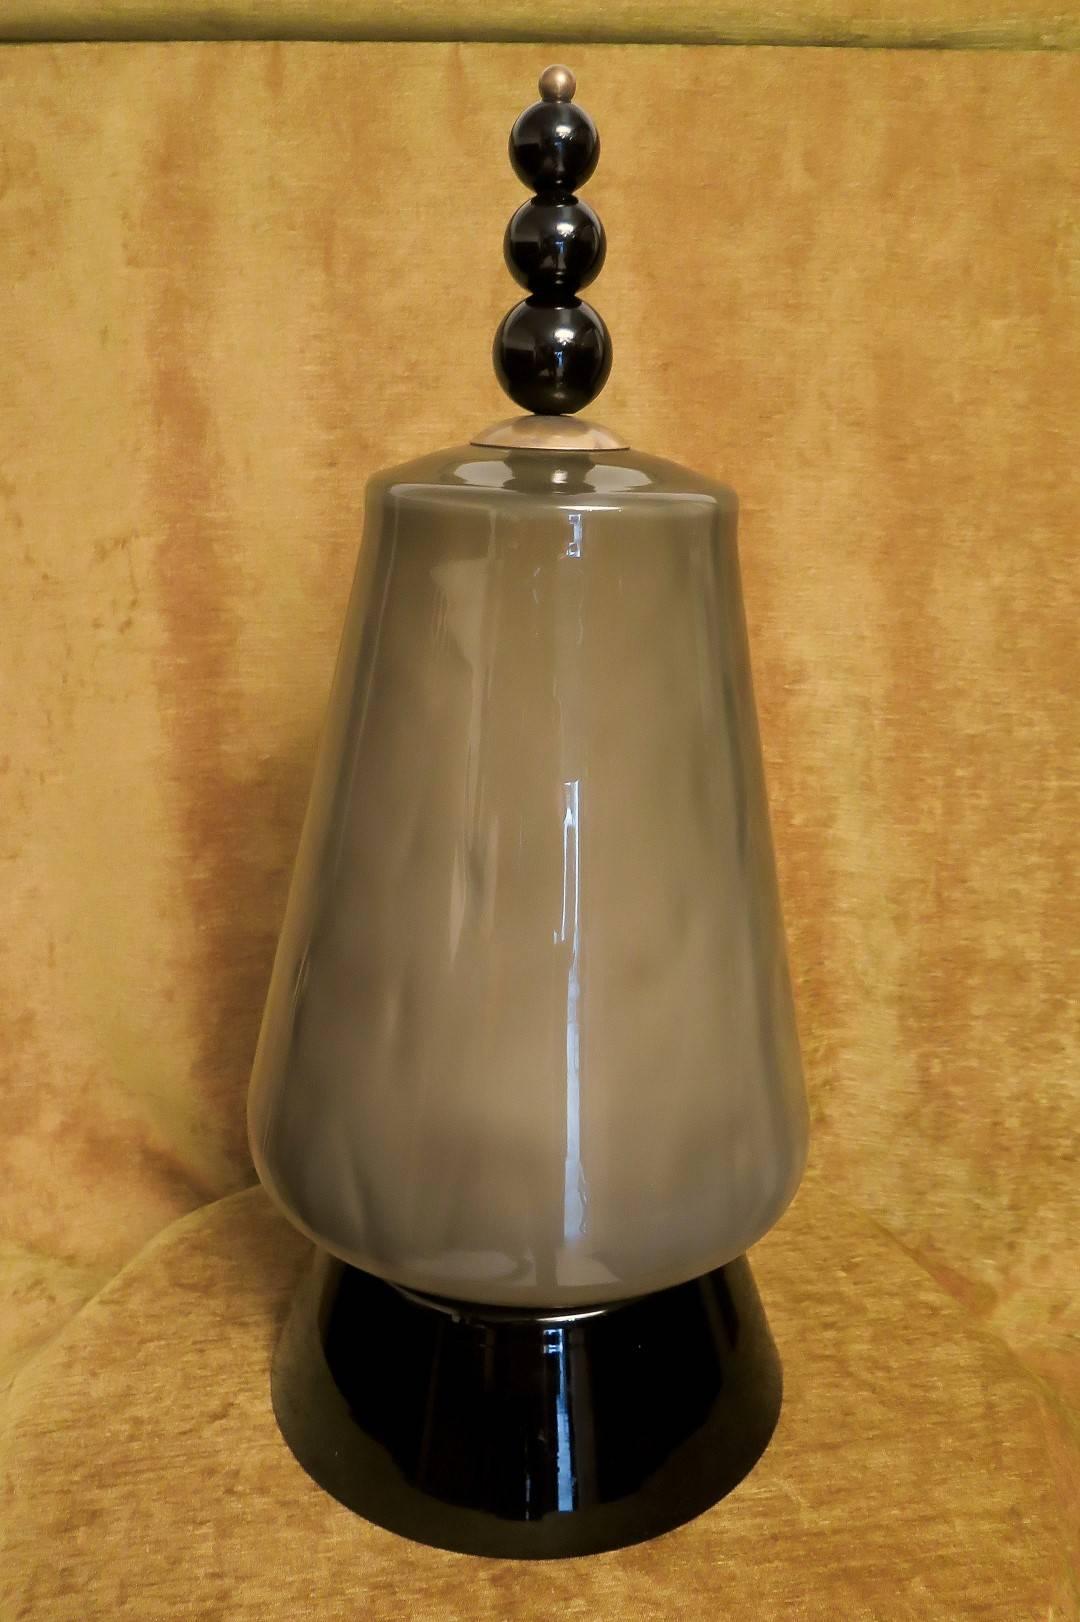 Table lamp of Murano, the basis in black glass and glass body color dove-gray, three black balls on top. Very beautiful reminiscent of a lantern.